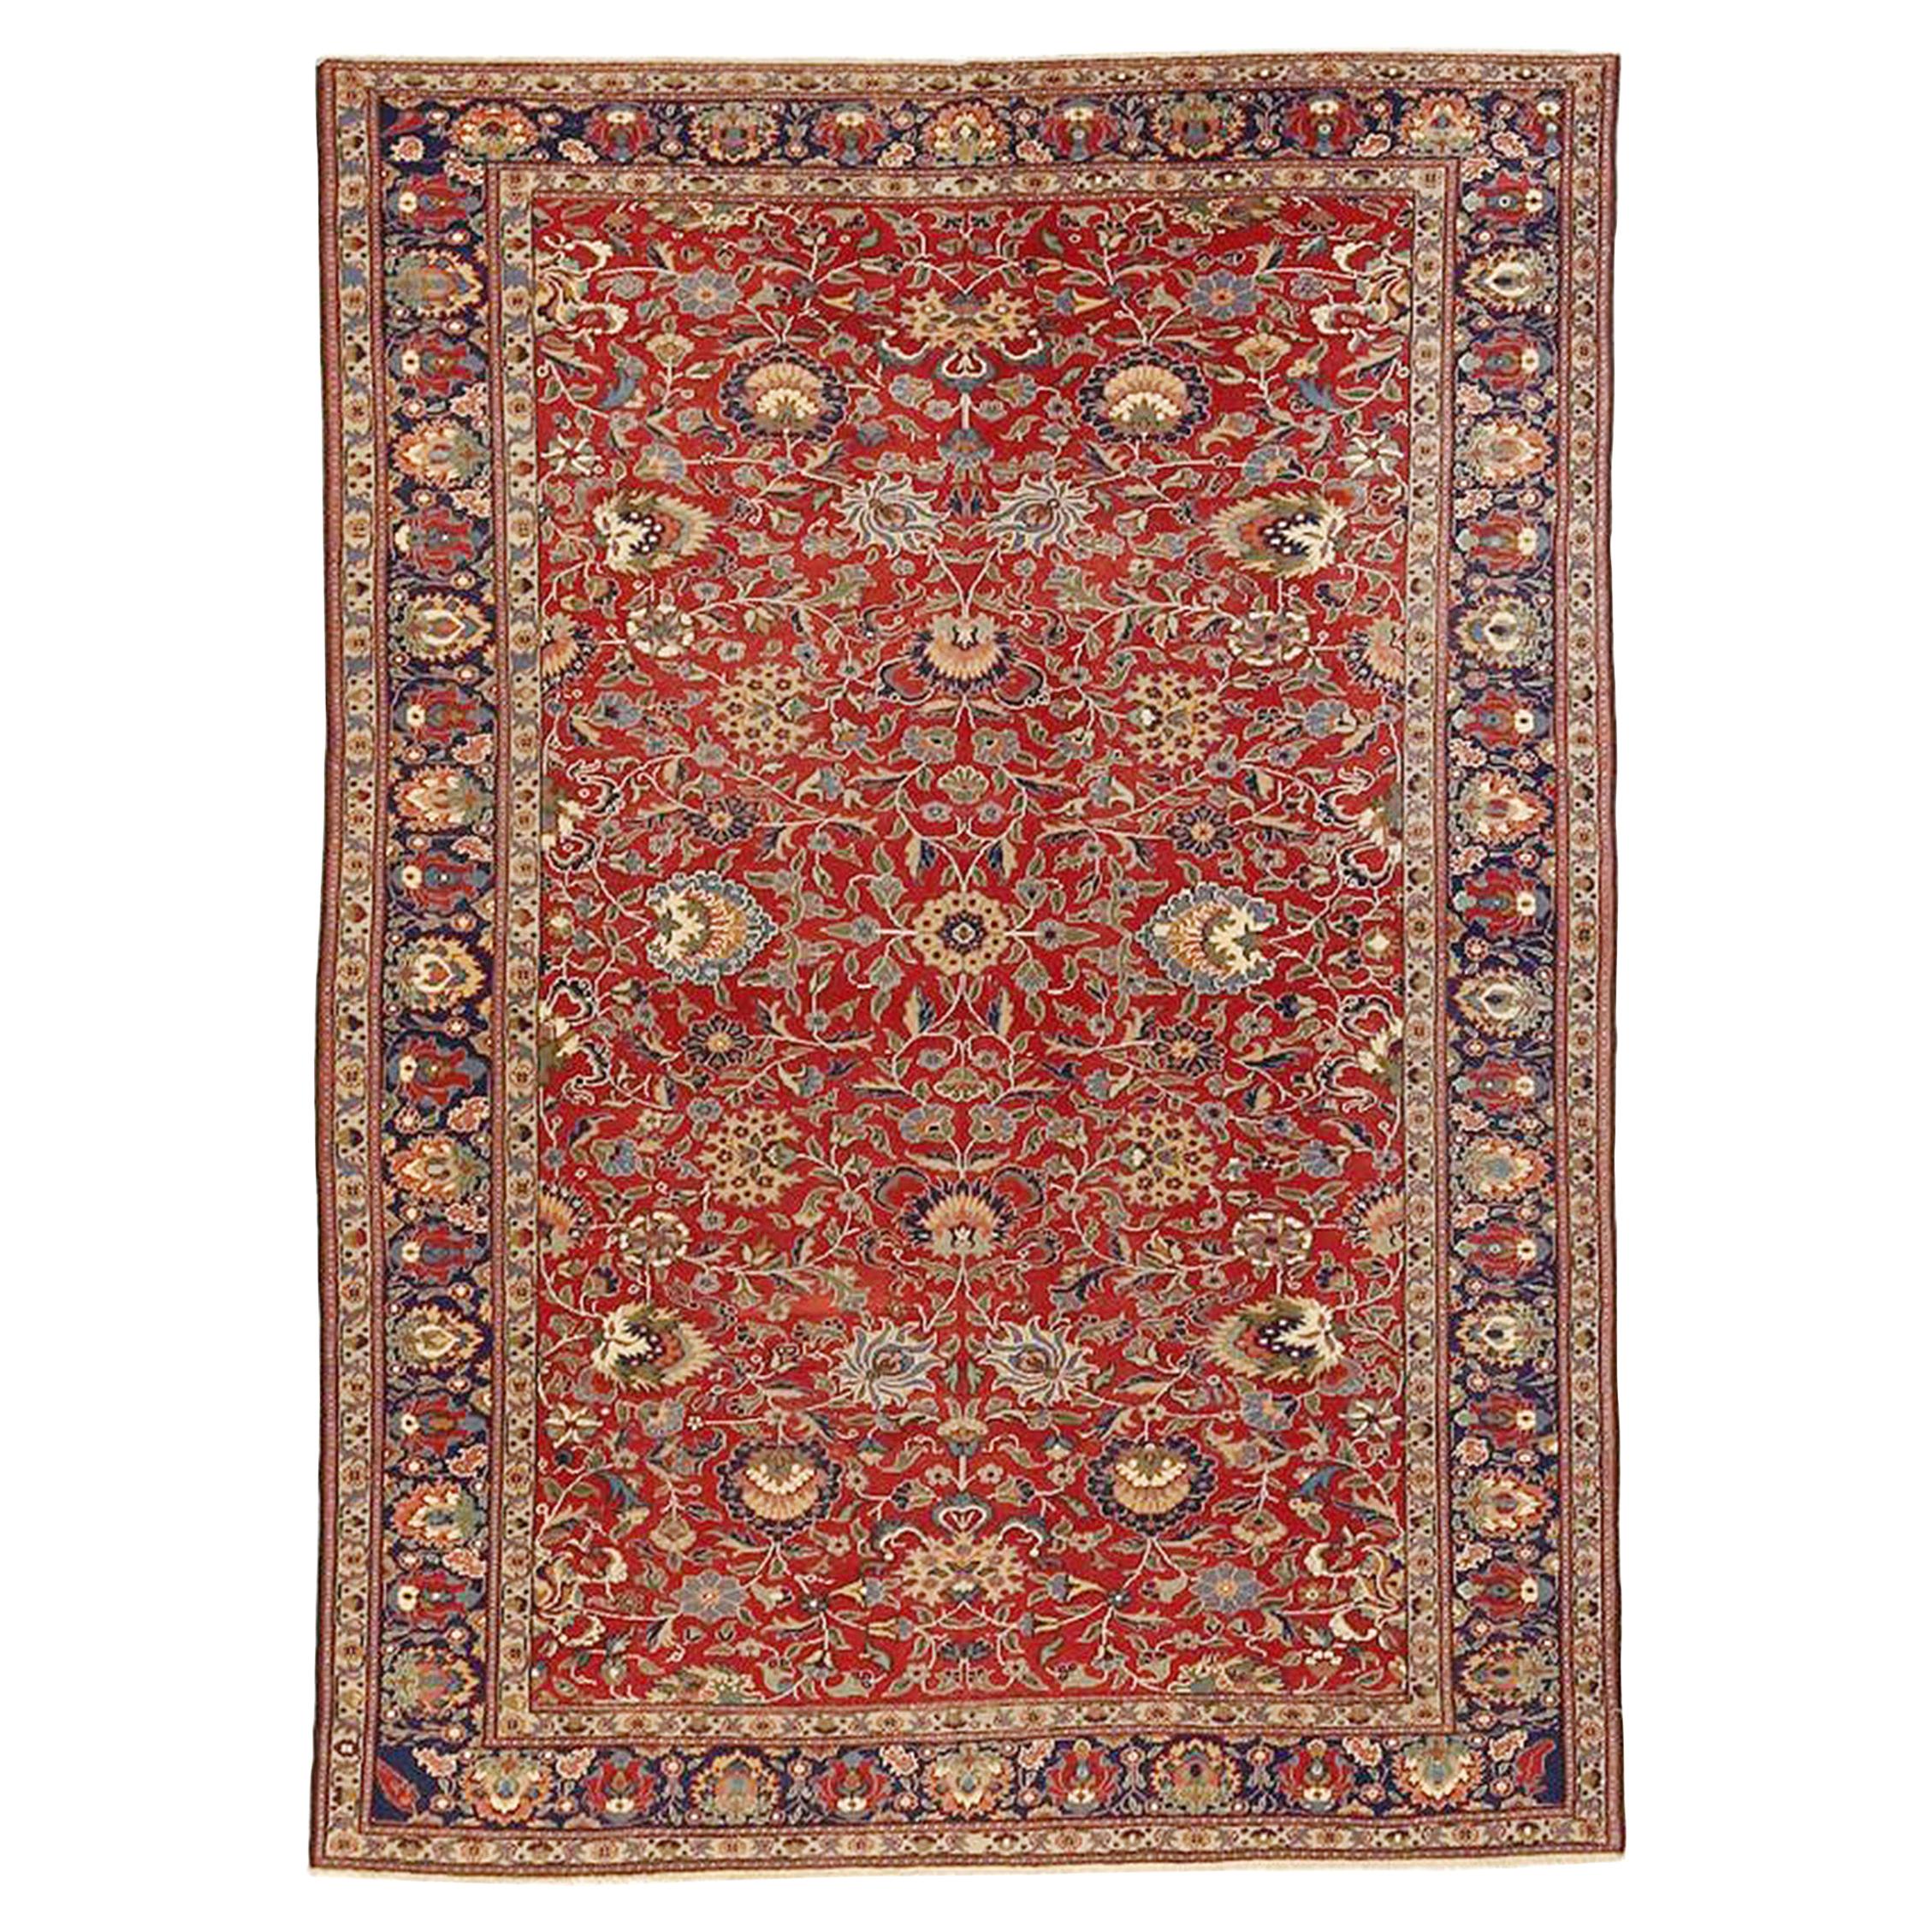 1920s Turkish Sivas Rug with Navy and Gray Floral Motifs on Red Field For Sale